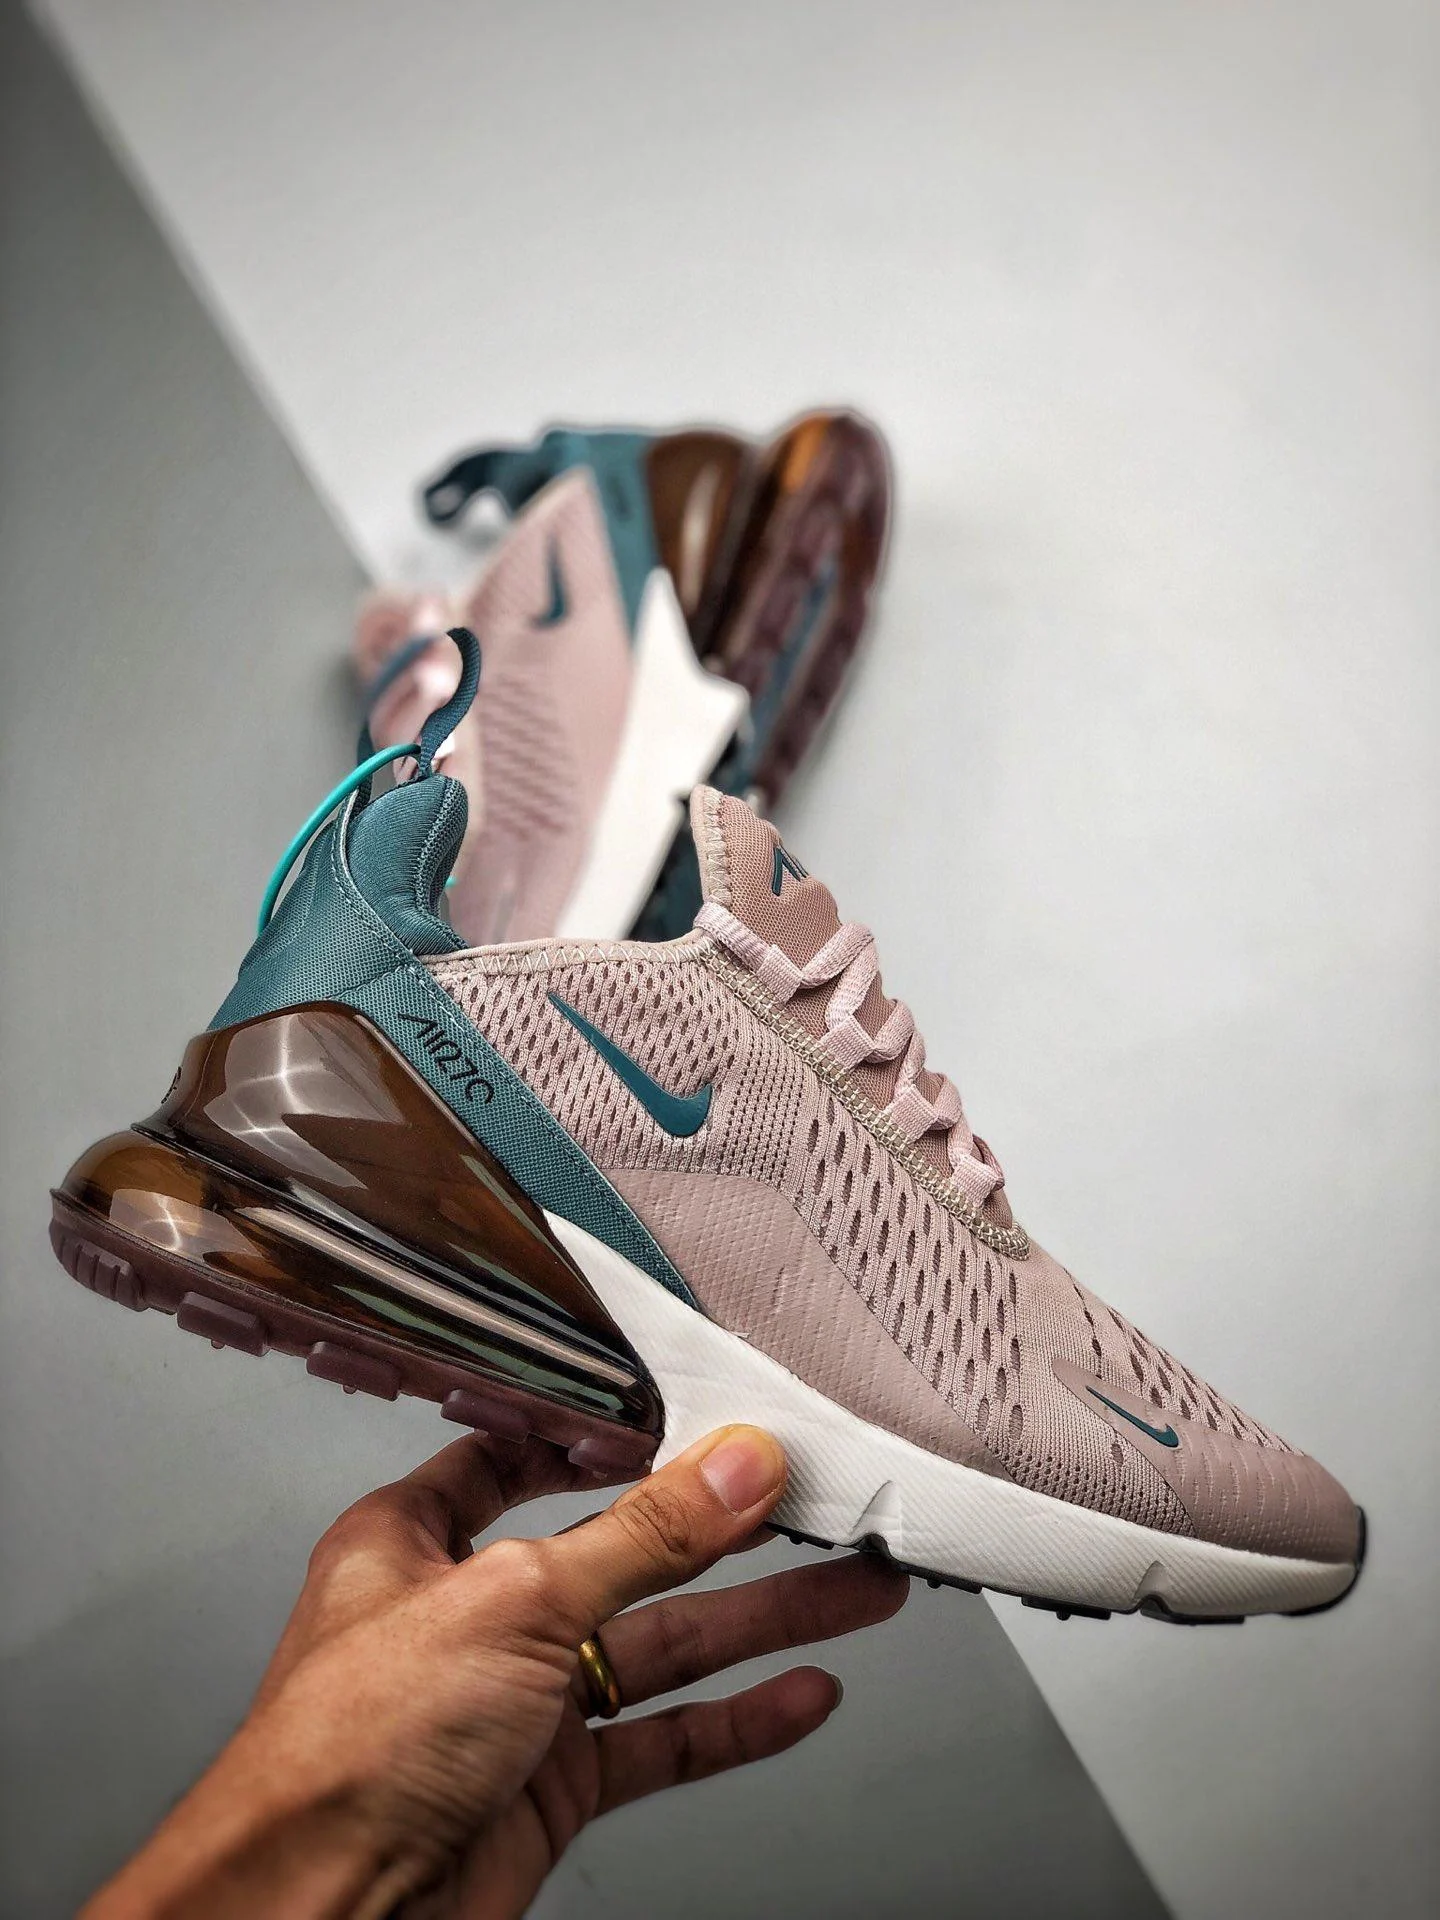 Nike Wmns Air Max 270 Pink Teal AH6789-602 For Sale